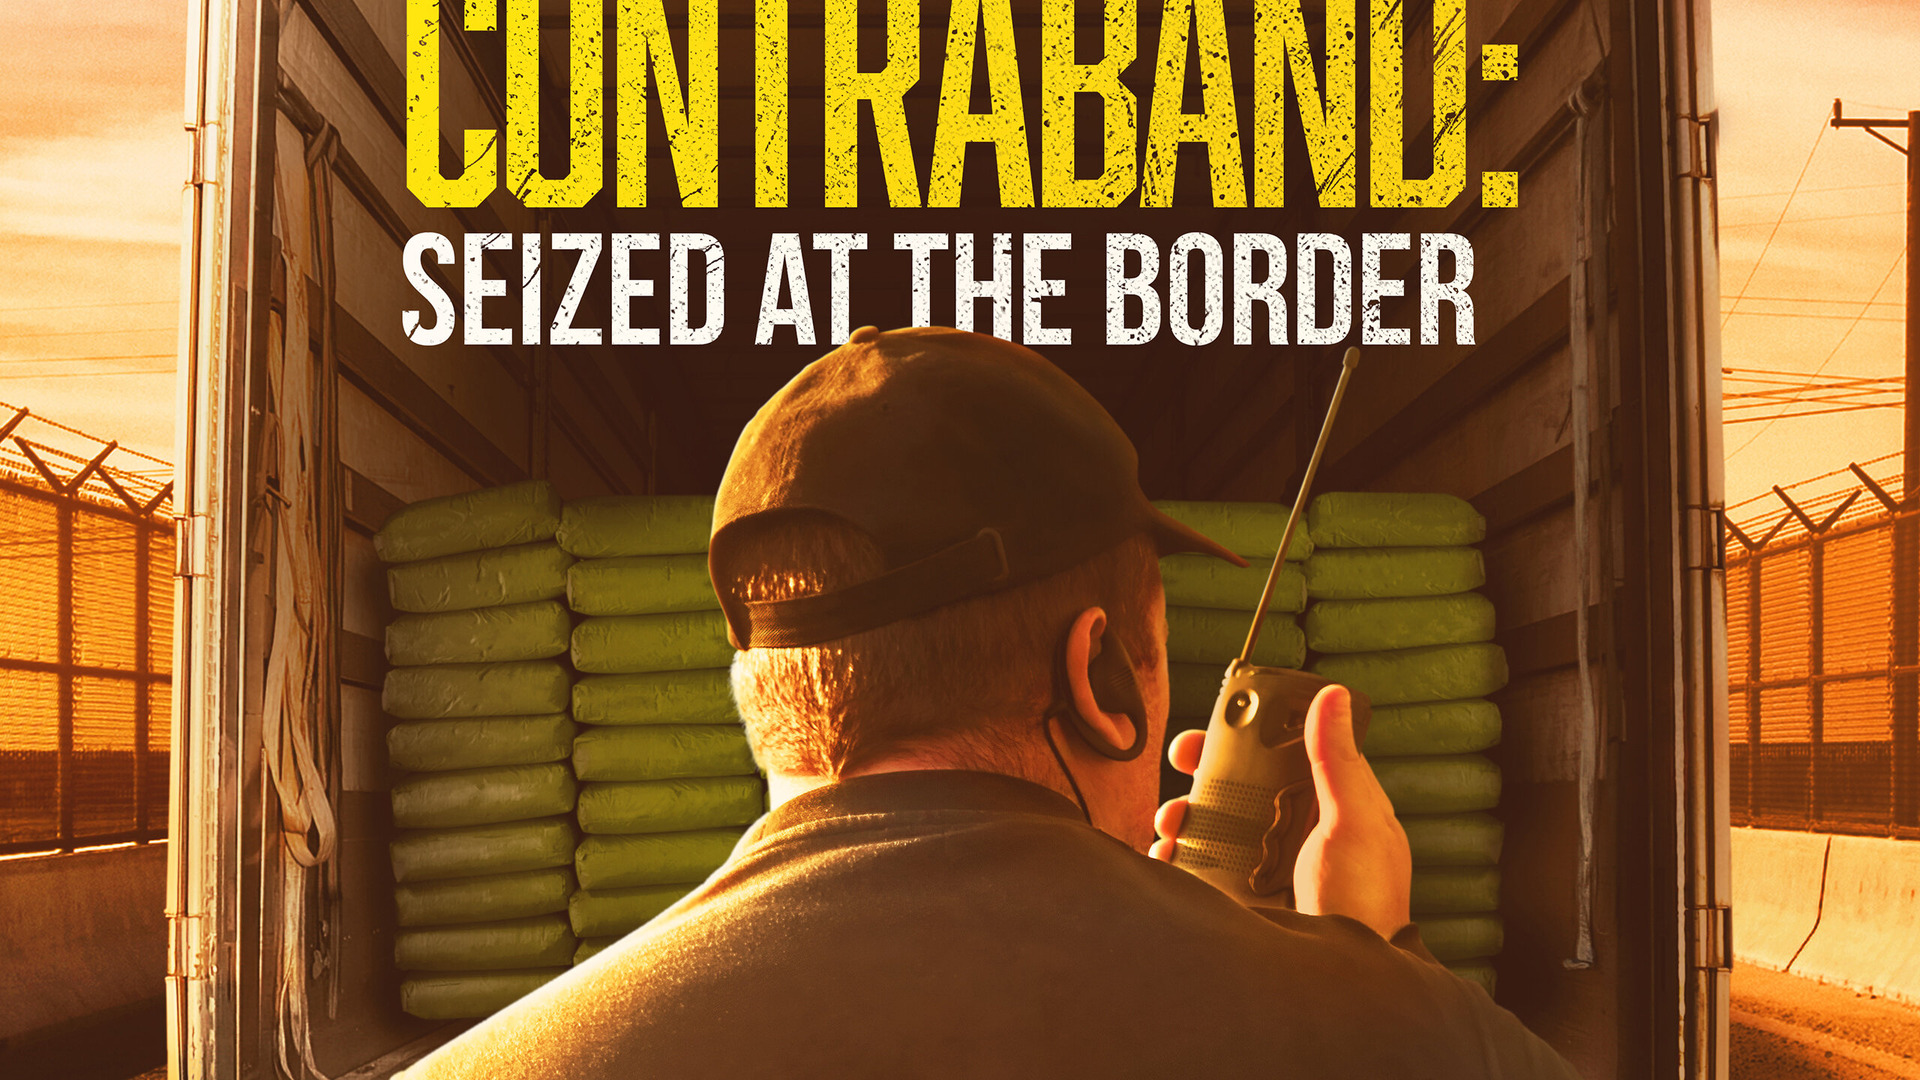 Show Contraband: Seized at the Border